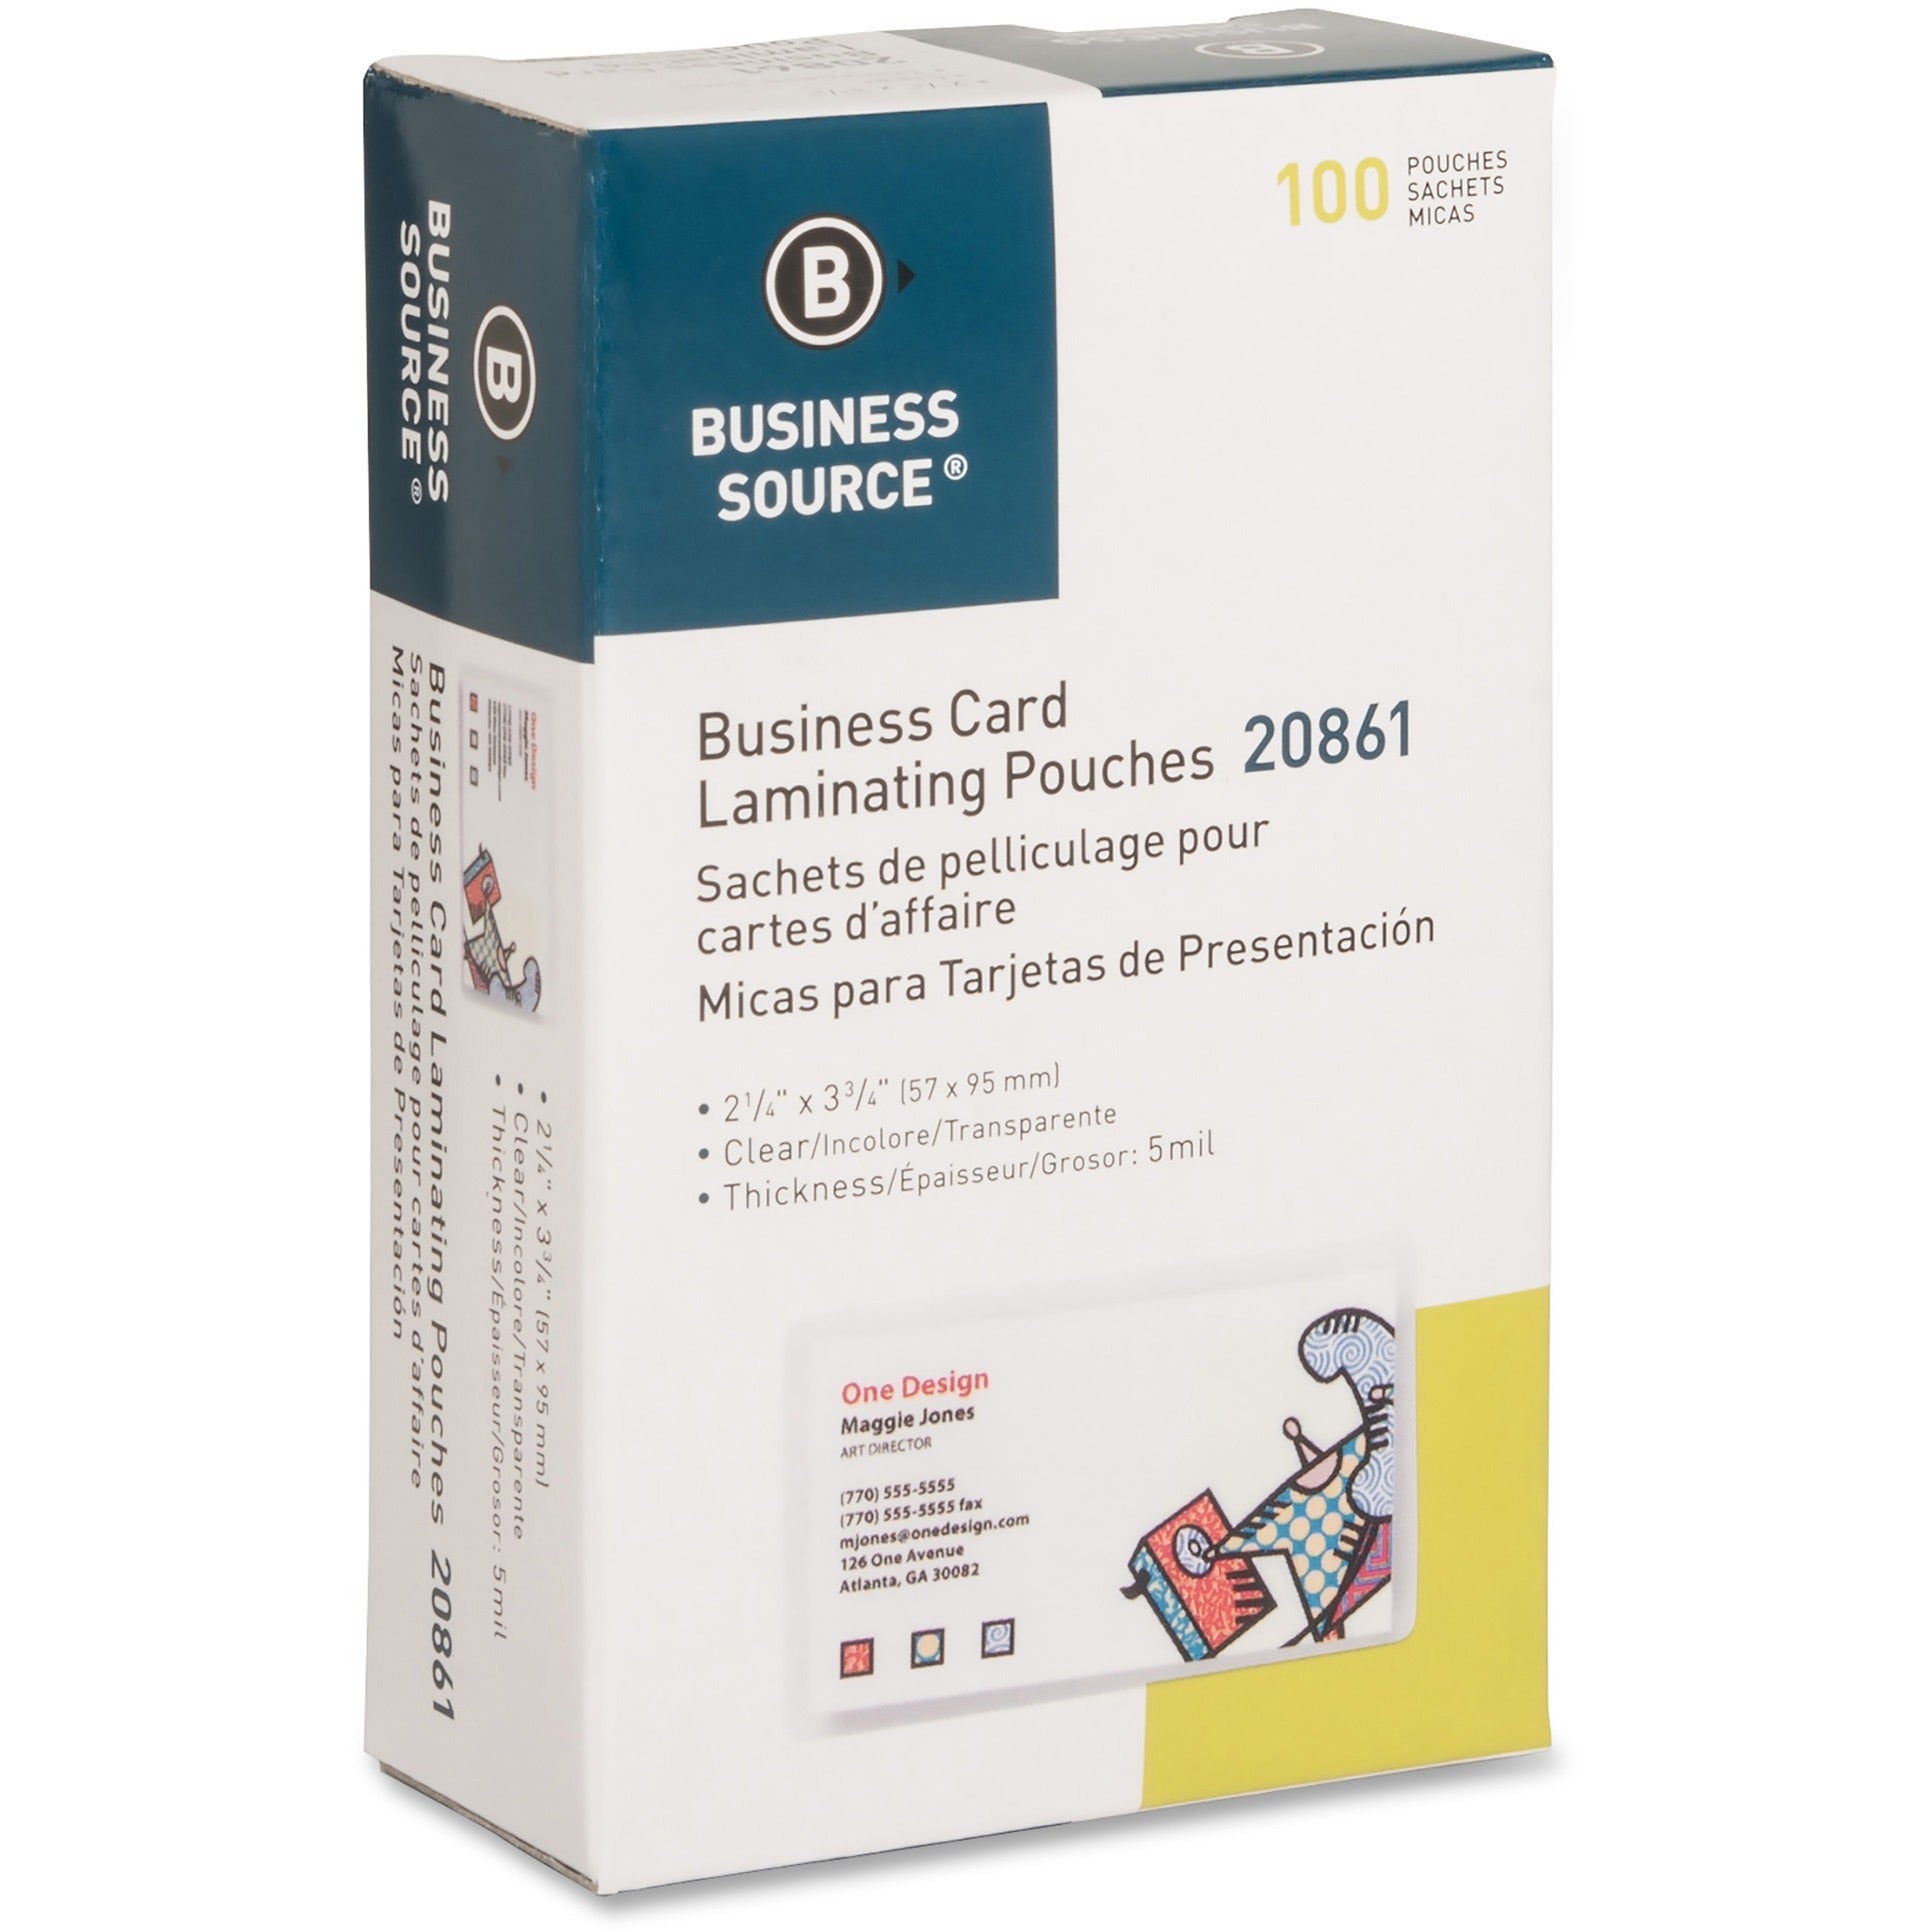 Business Source 5 mil Business Card Laminating Pouches - Laminating Pouch/Sheet Size: 2.25" Width x 3.75" Length x 5 mil Thickness - for Business Card - Pre-trimmed, Moisture Resistant, Fade Resistant - Clear - 100 / Box - 